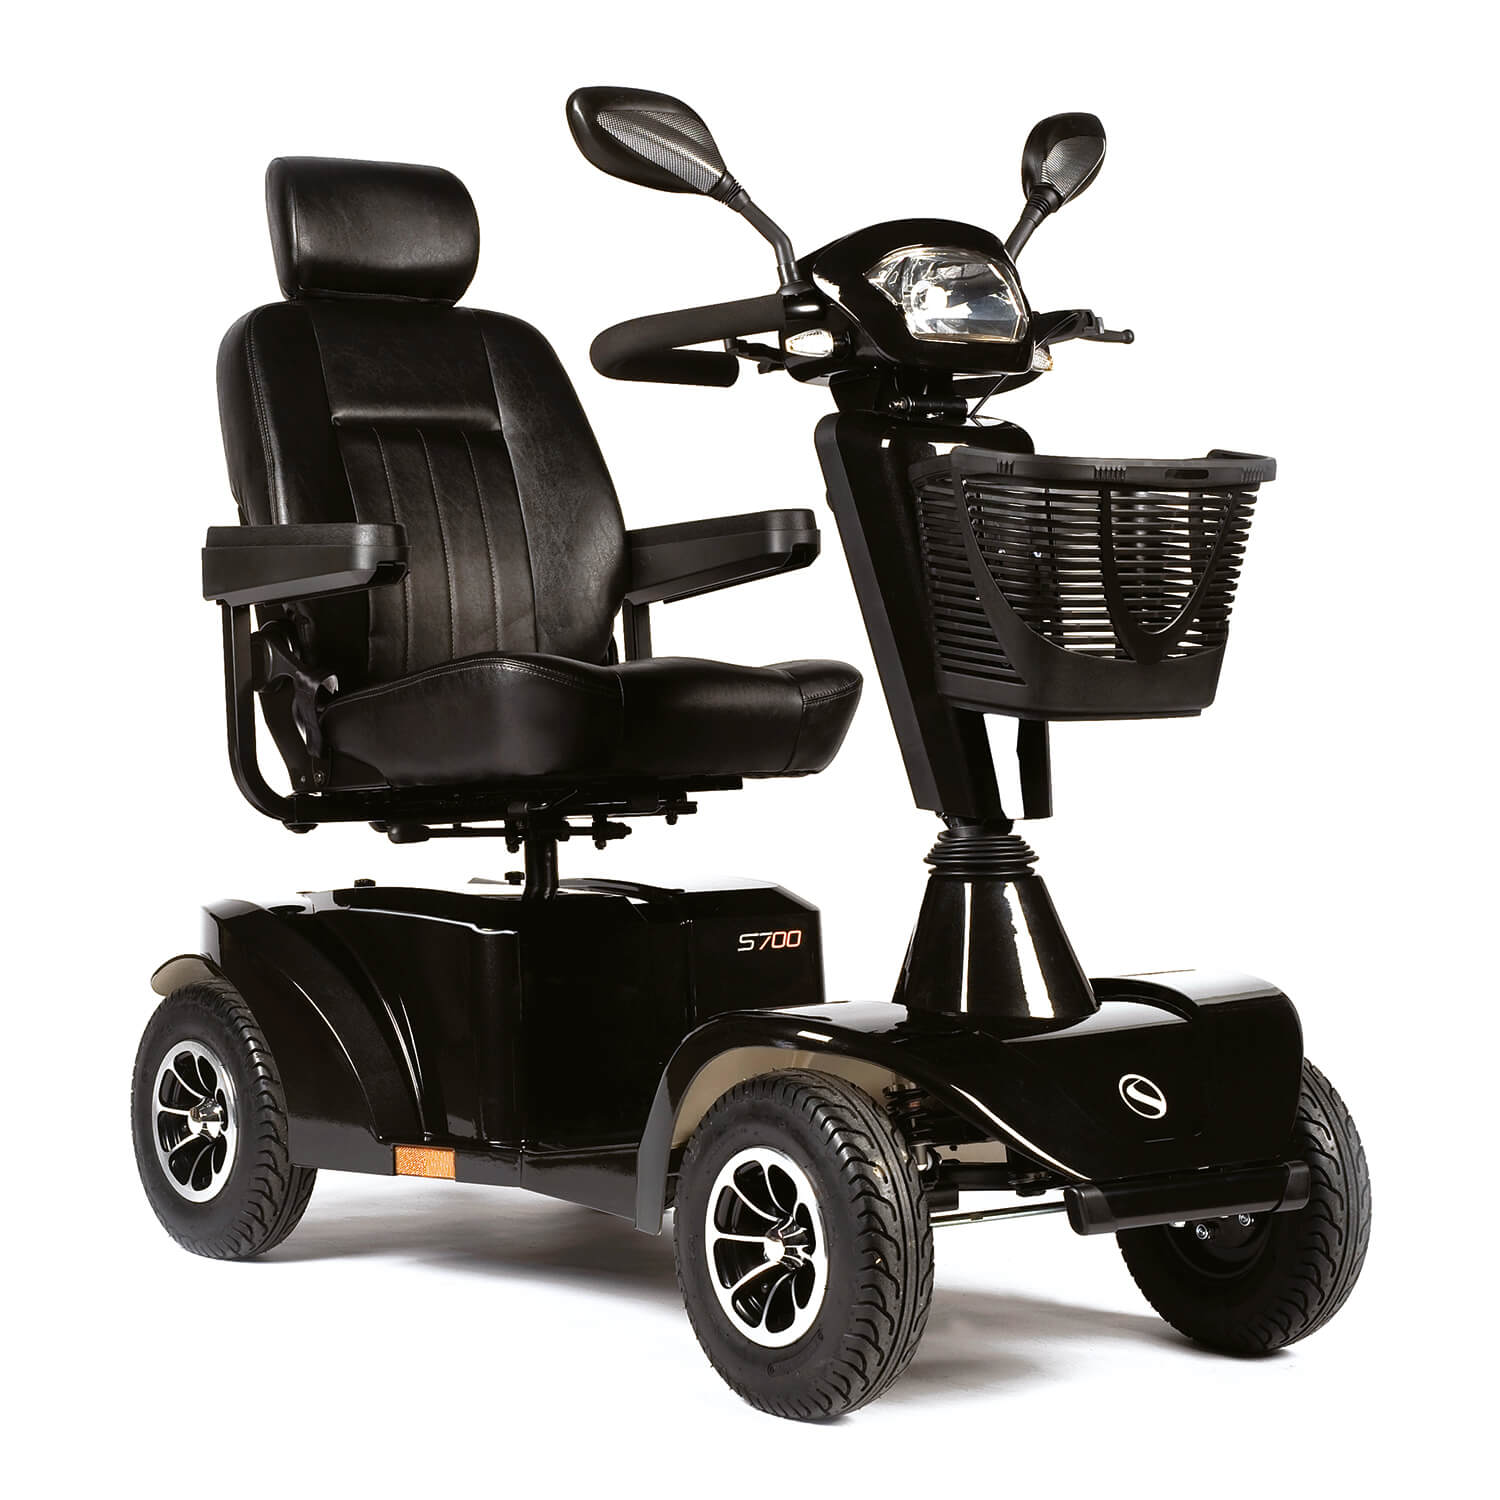 STERLING S700 Class 3 Mobility Scooter